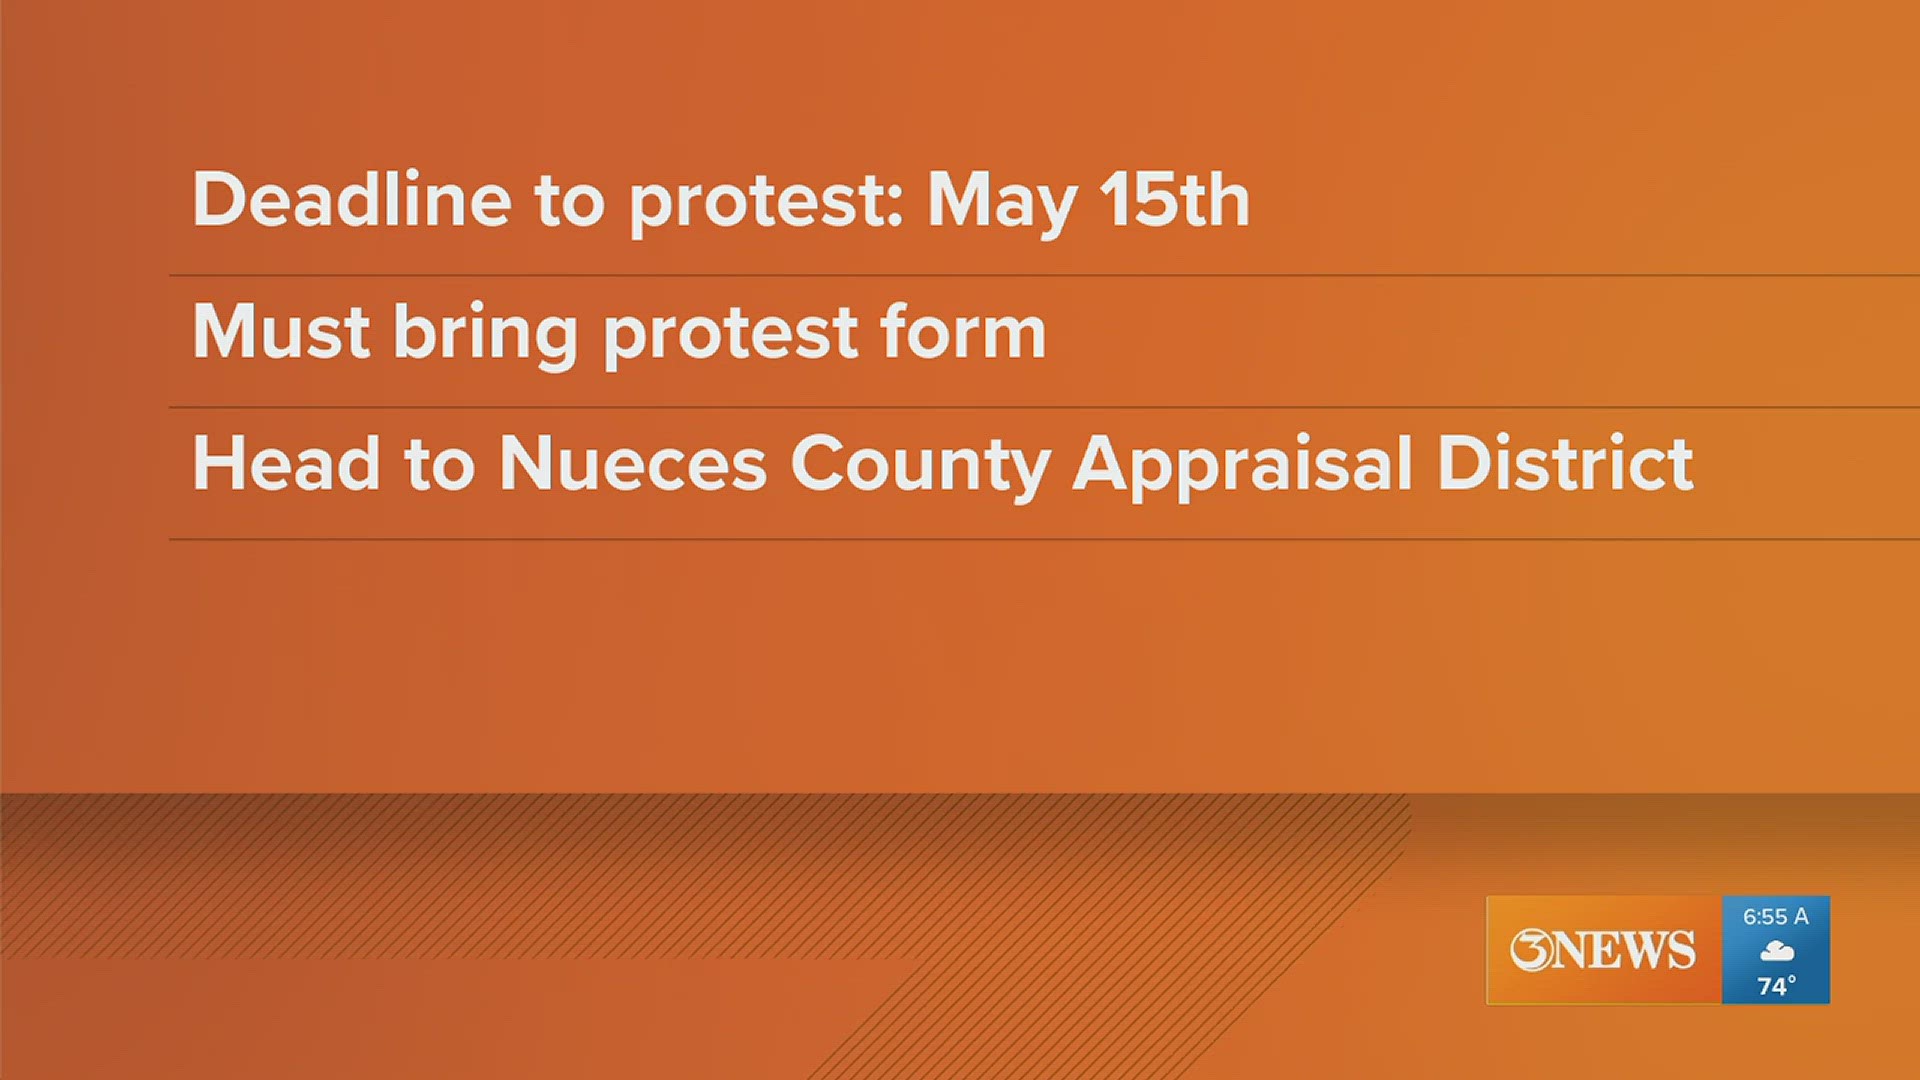 Bring the protest form mailed to you with the notice of your appraised value and appropriate documentation ready to back your claims.